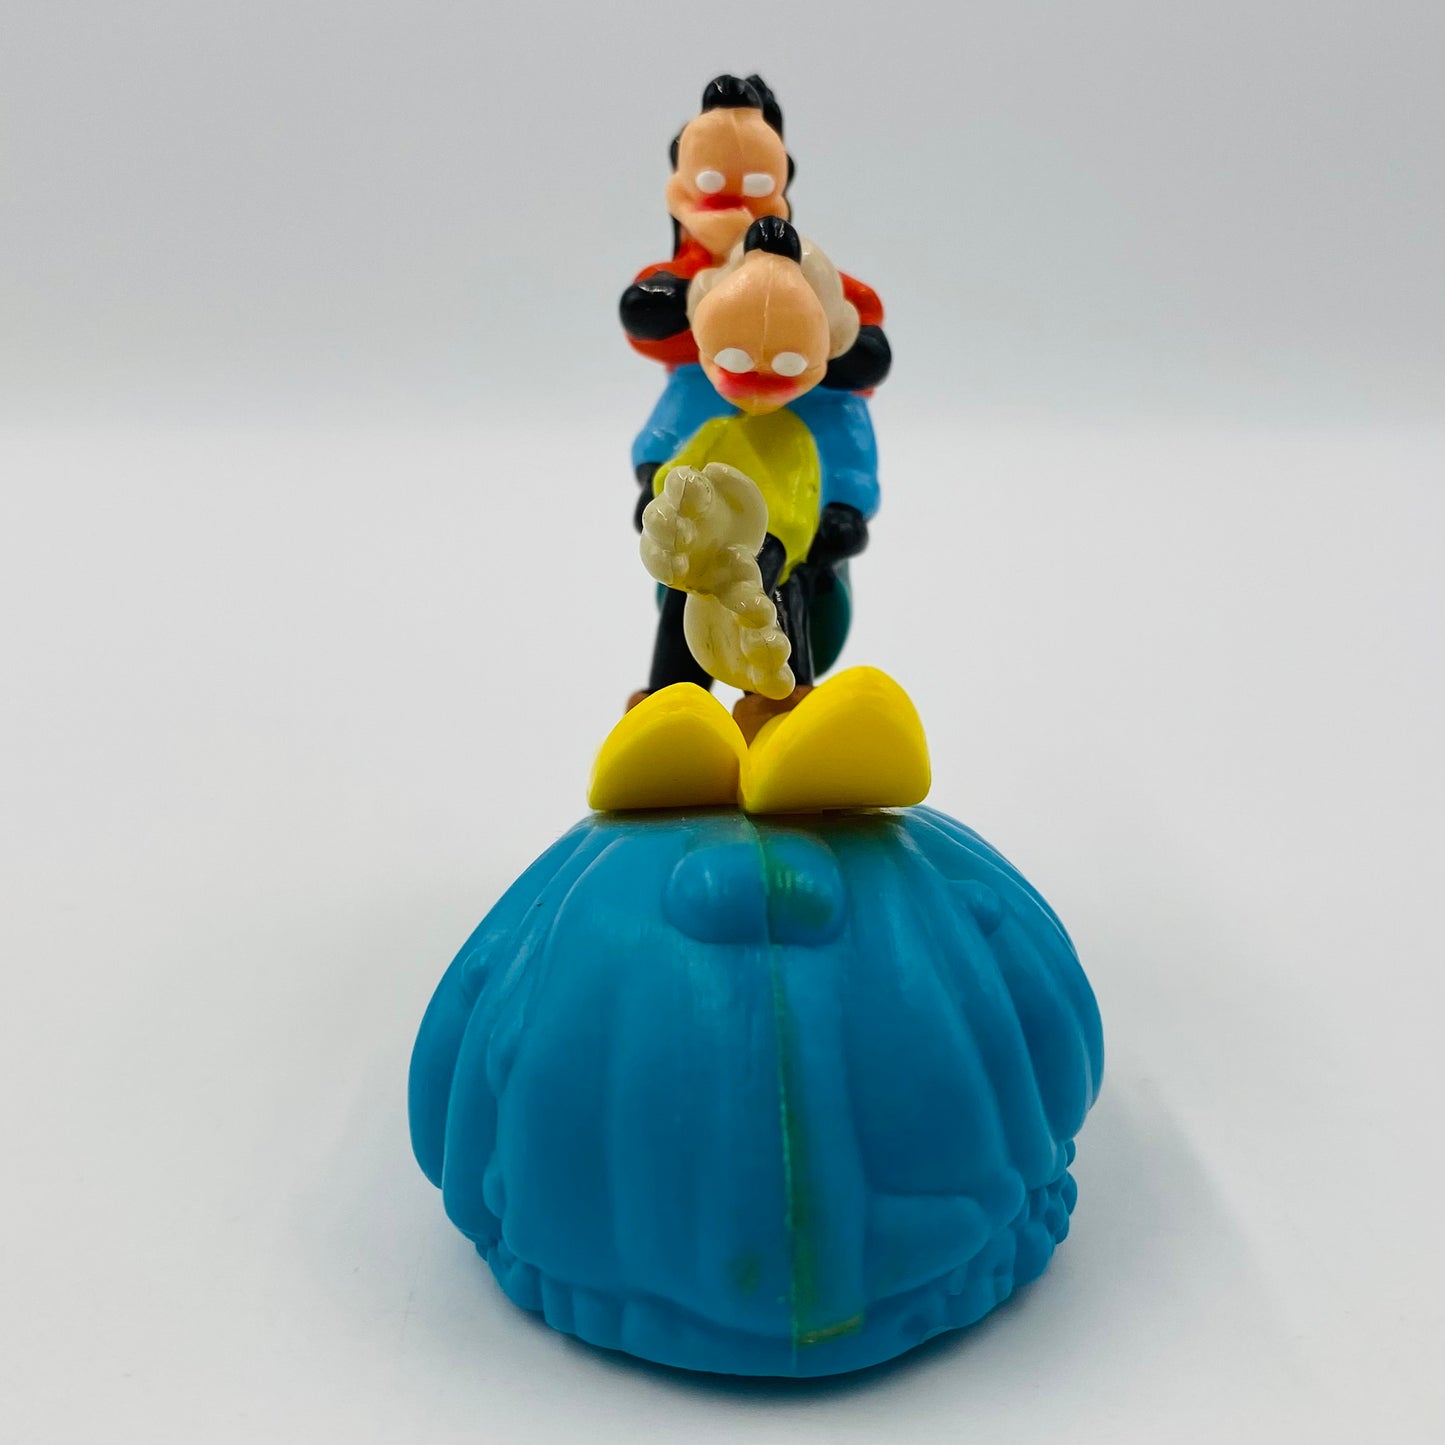 A Goofy Movie Goofy and Max on Water Skis Burger King Kids' Meal toy (1995) loose